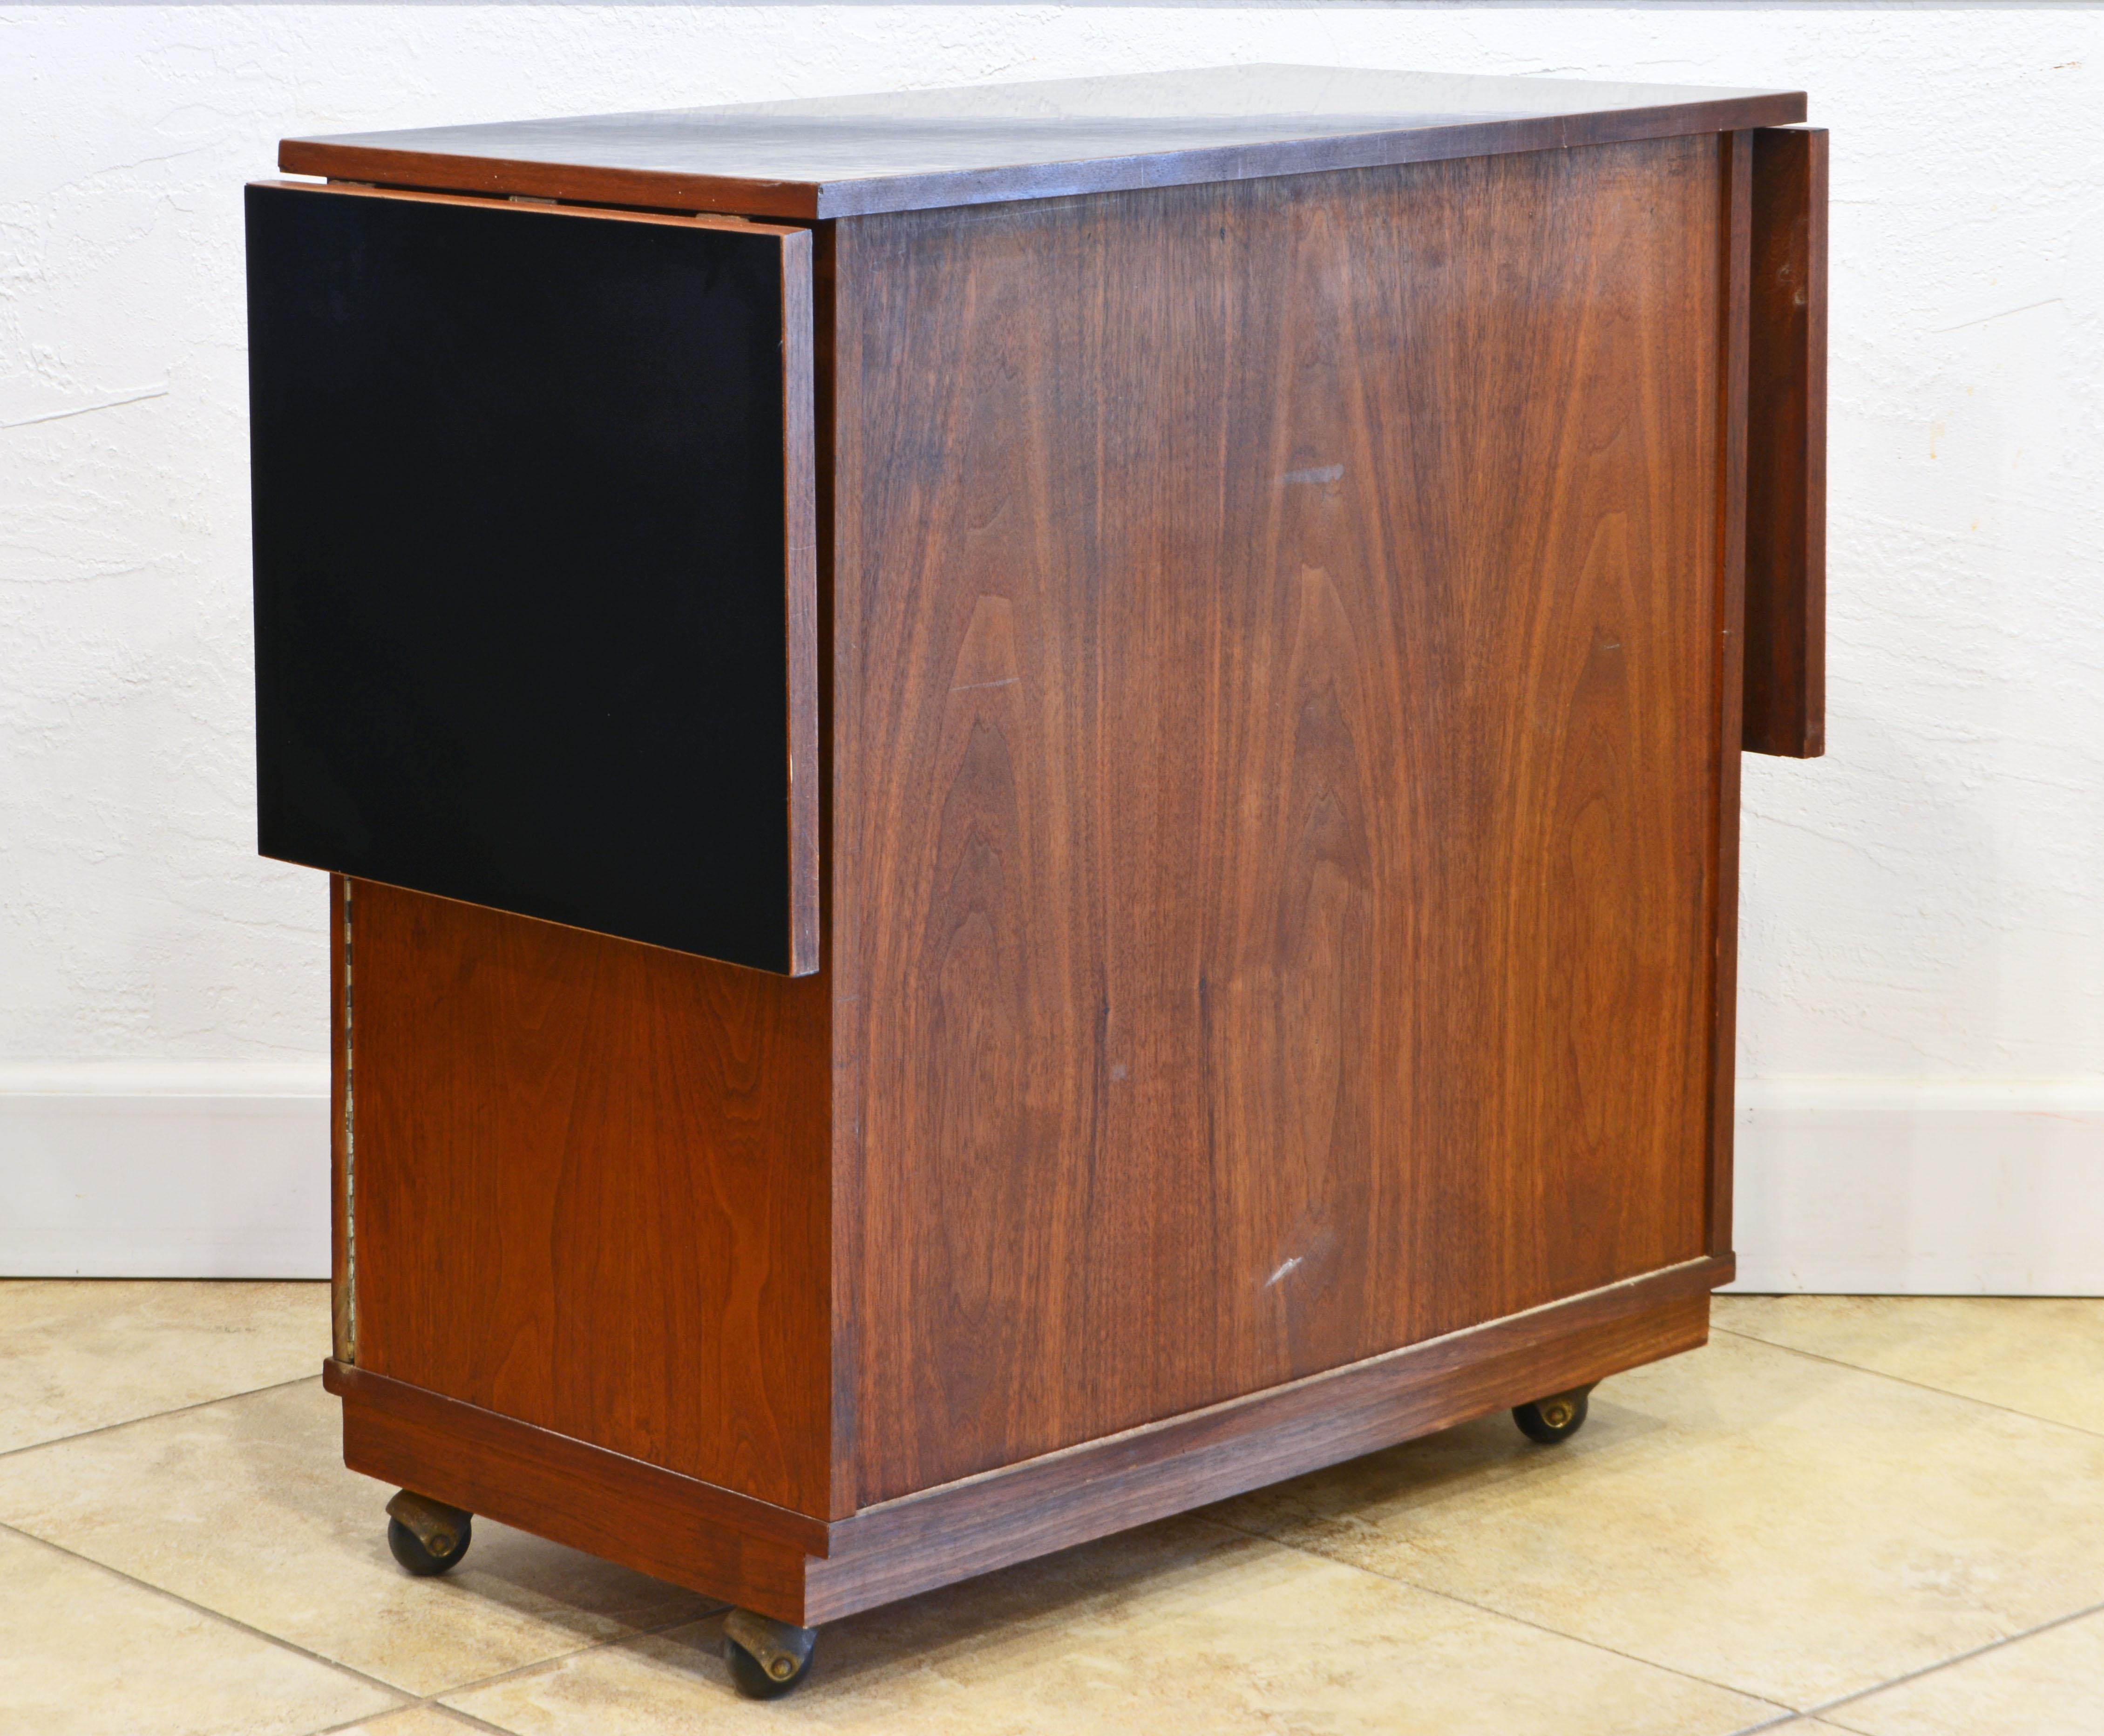 20th Century Mid-Century Modern Expandable Walnut Bar Cart and Cabinet by Jack Cartwright